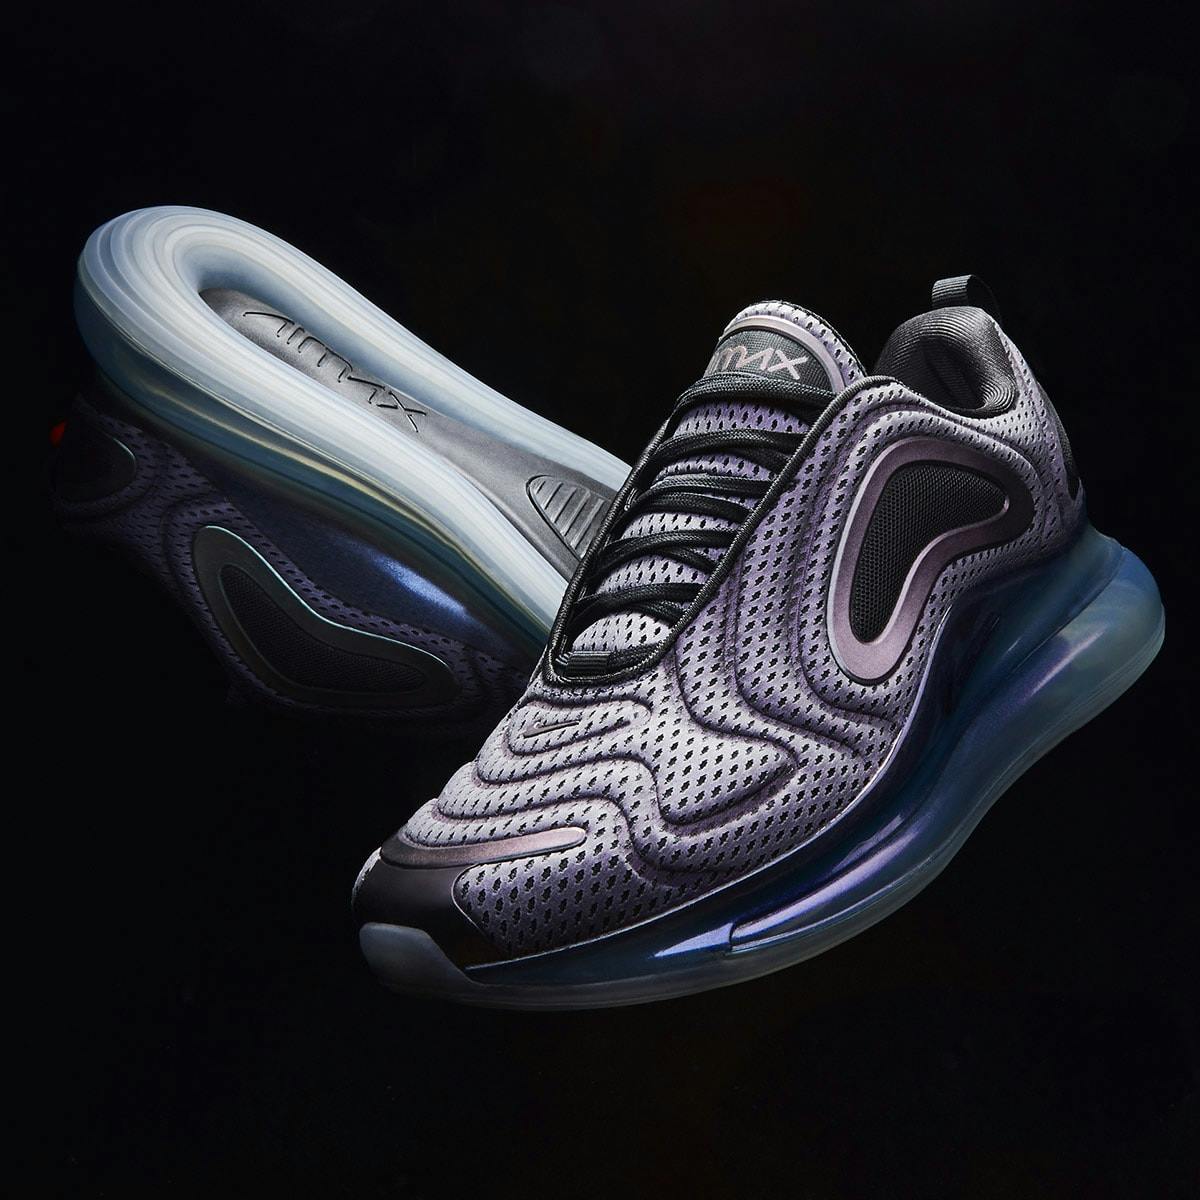 Nike's Tallest Air Unit - The Air Max 720 - Lands on END. Launches | END.